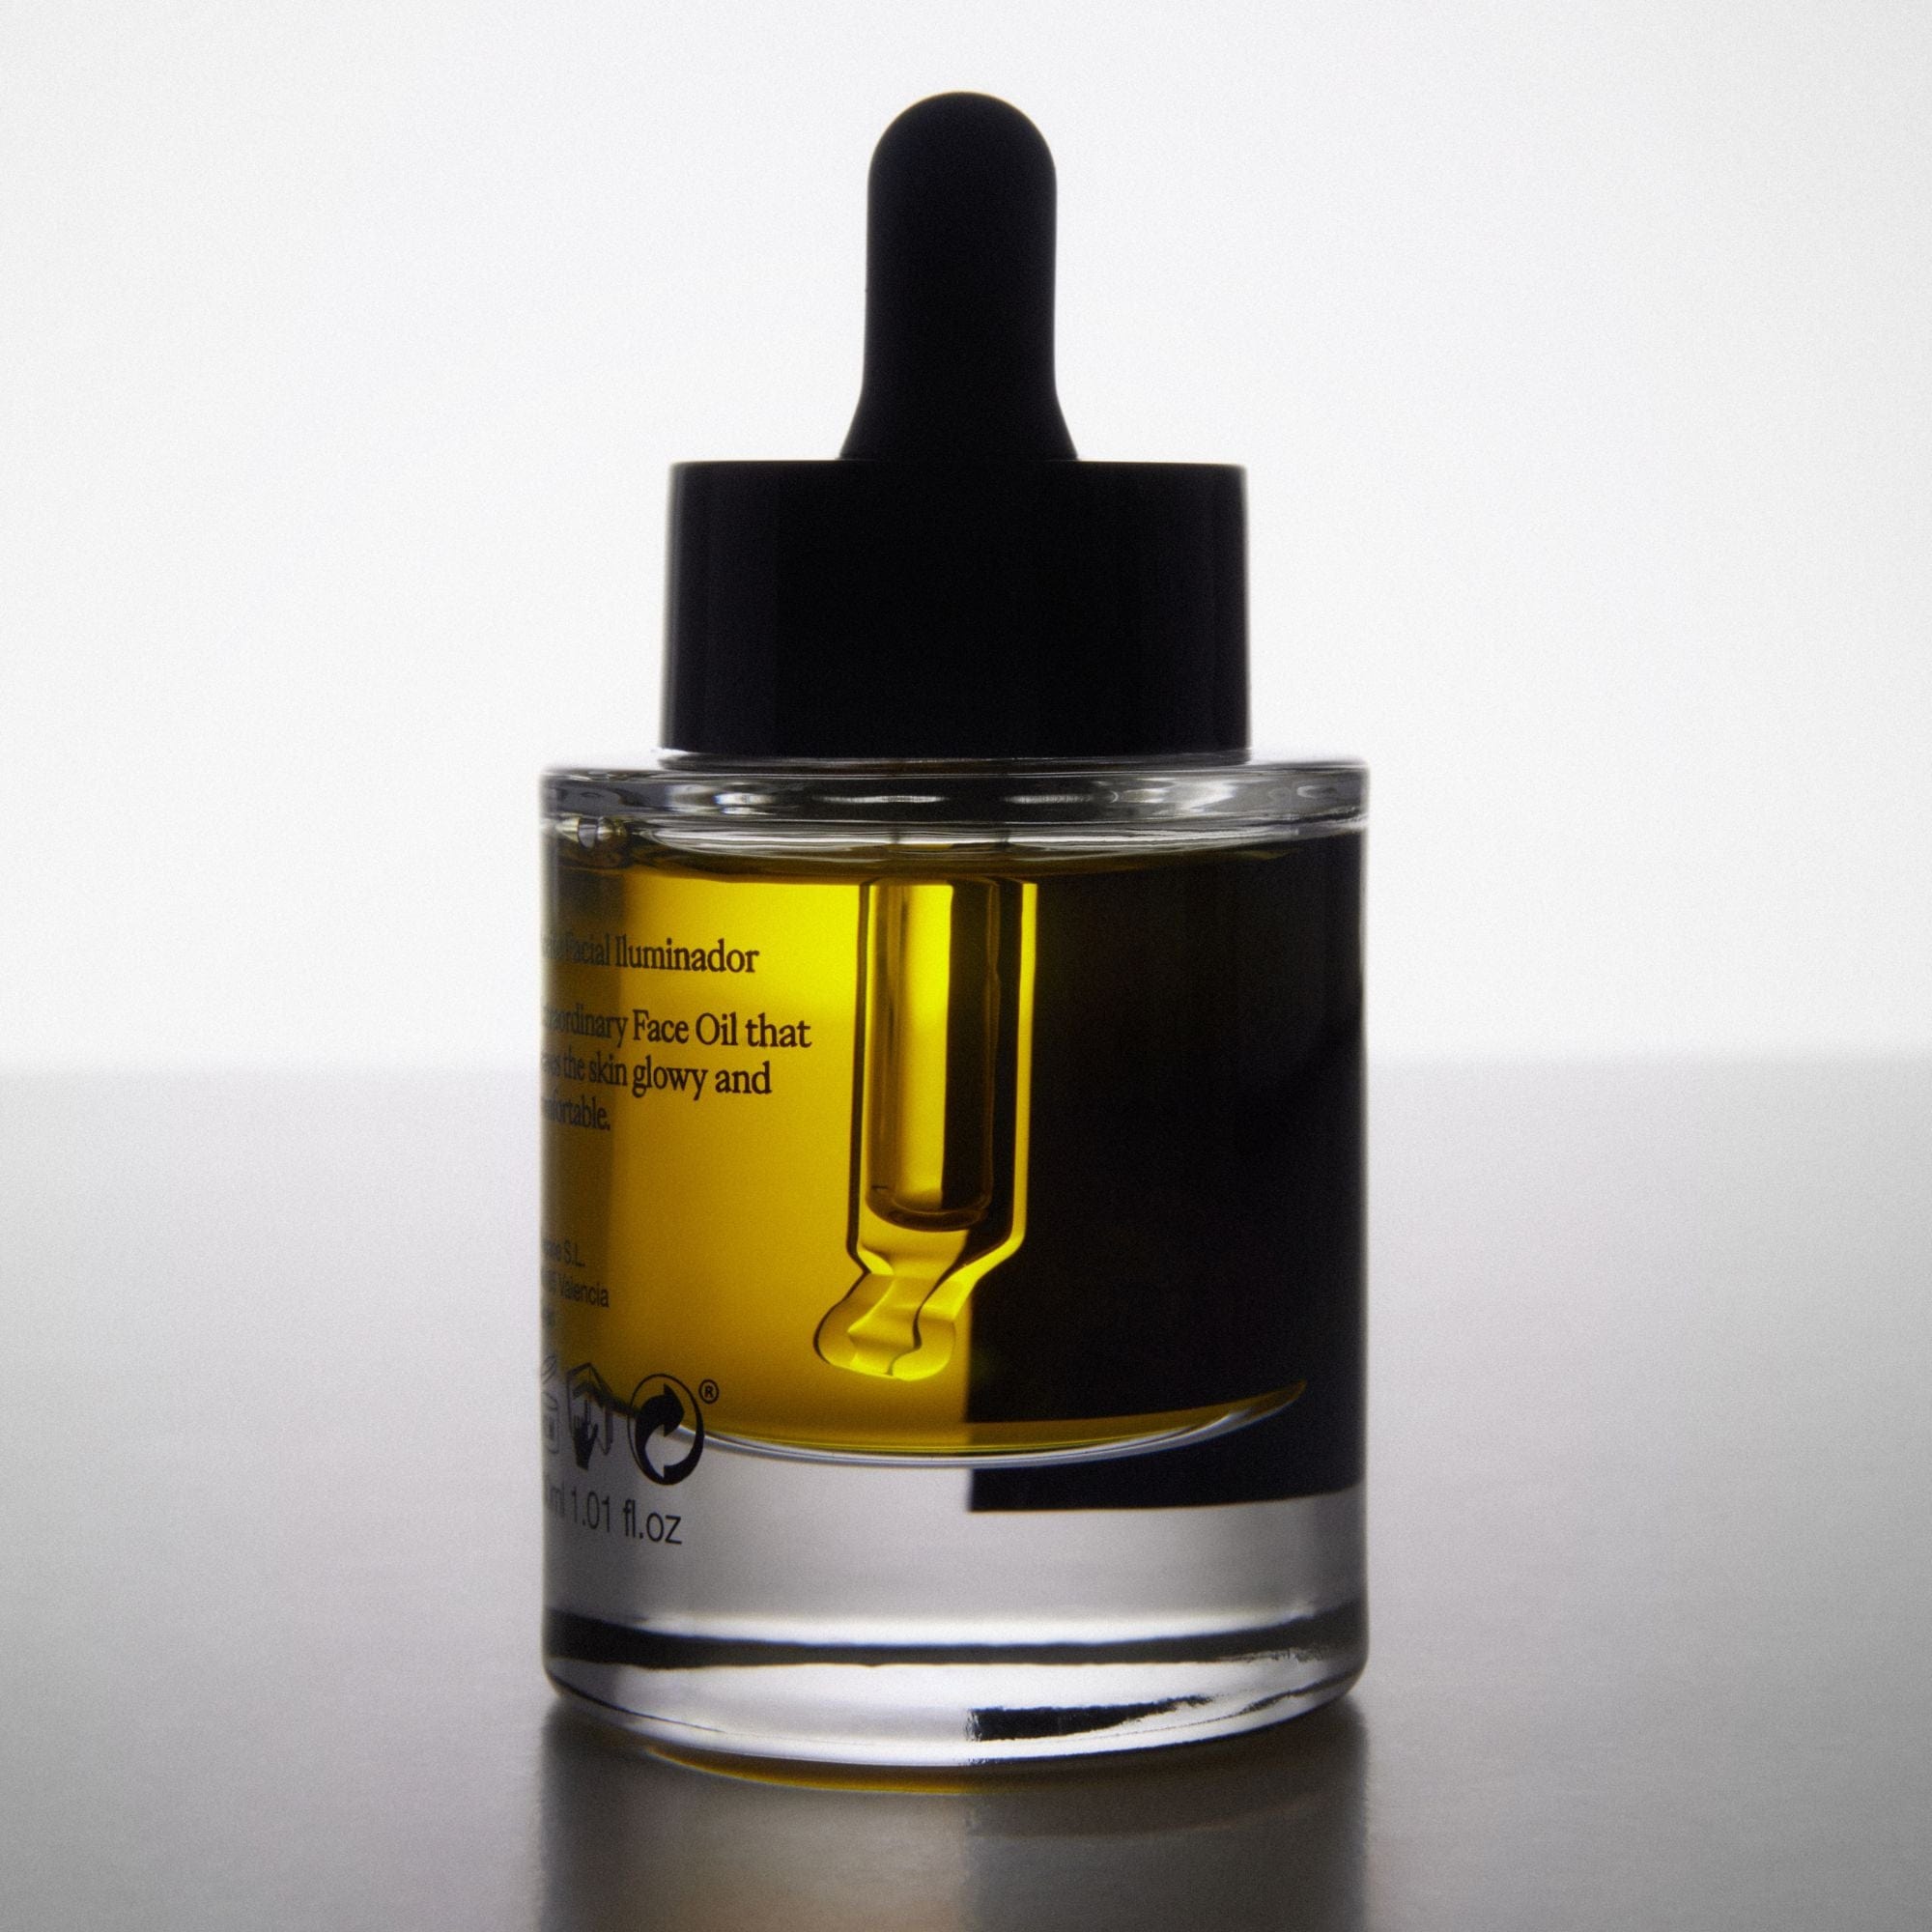 The Great Oil The Great Fusion Aceite Facial